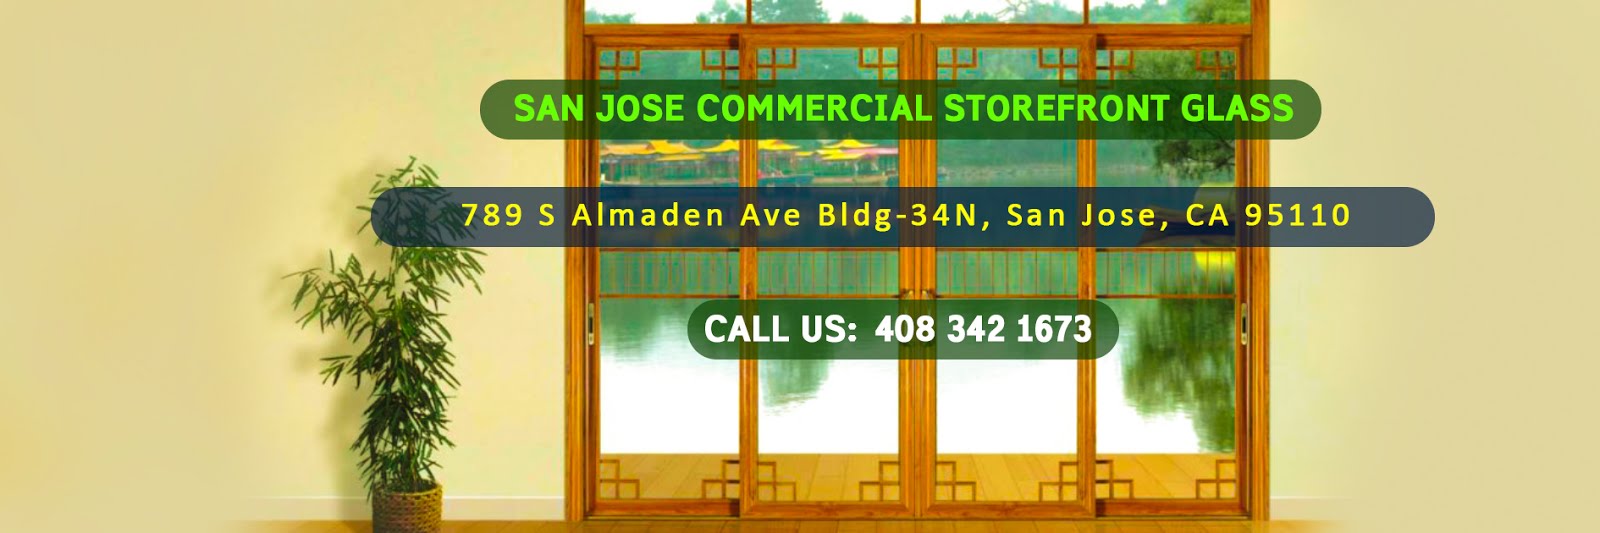 San Jose Commercial Storefront Glass